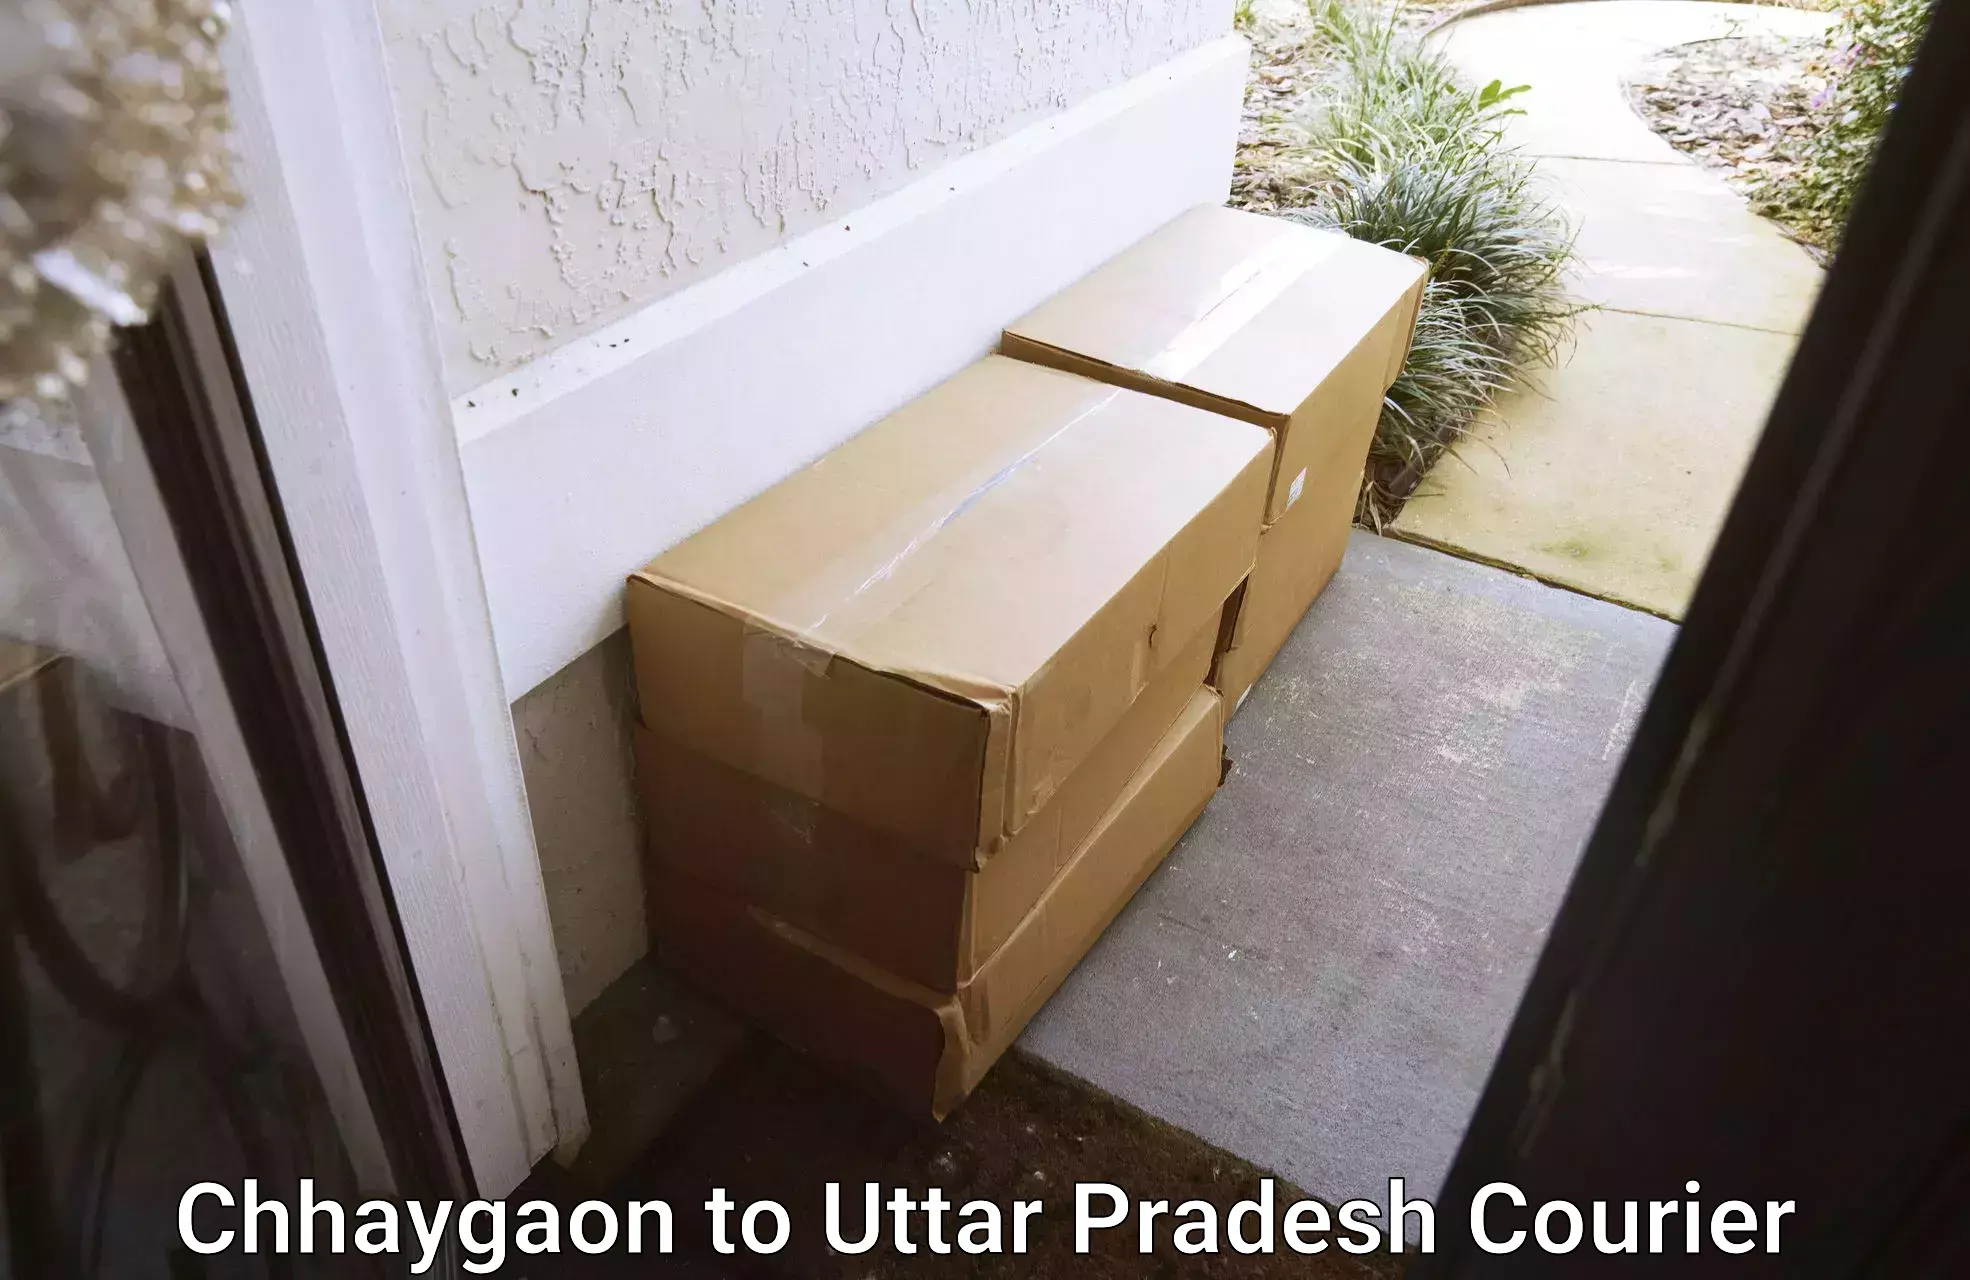 High-speed parcel service Chhaygaon to Vrindavan